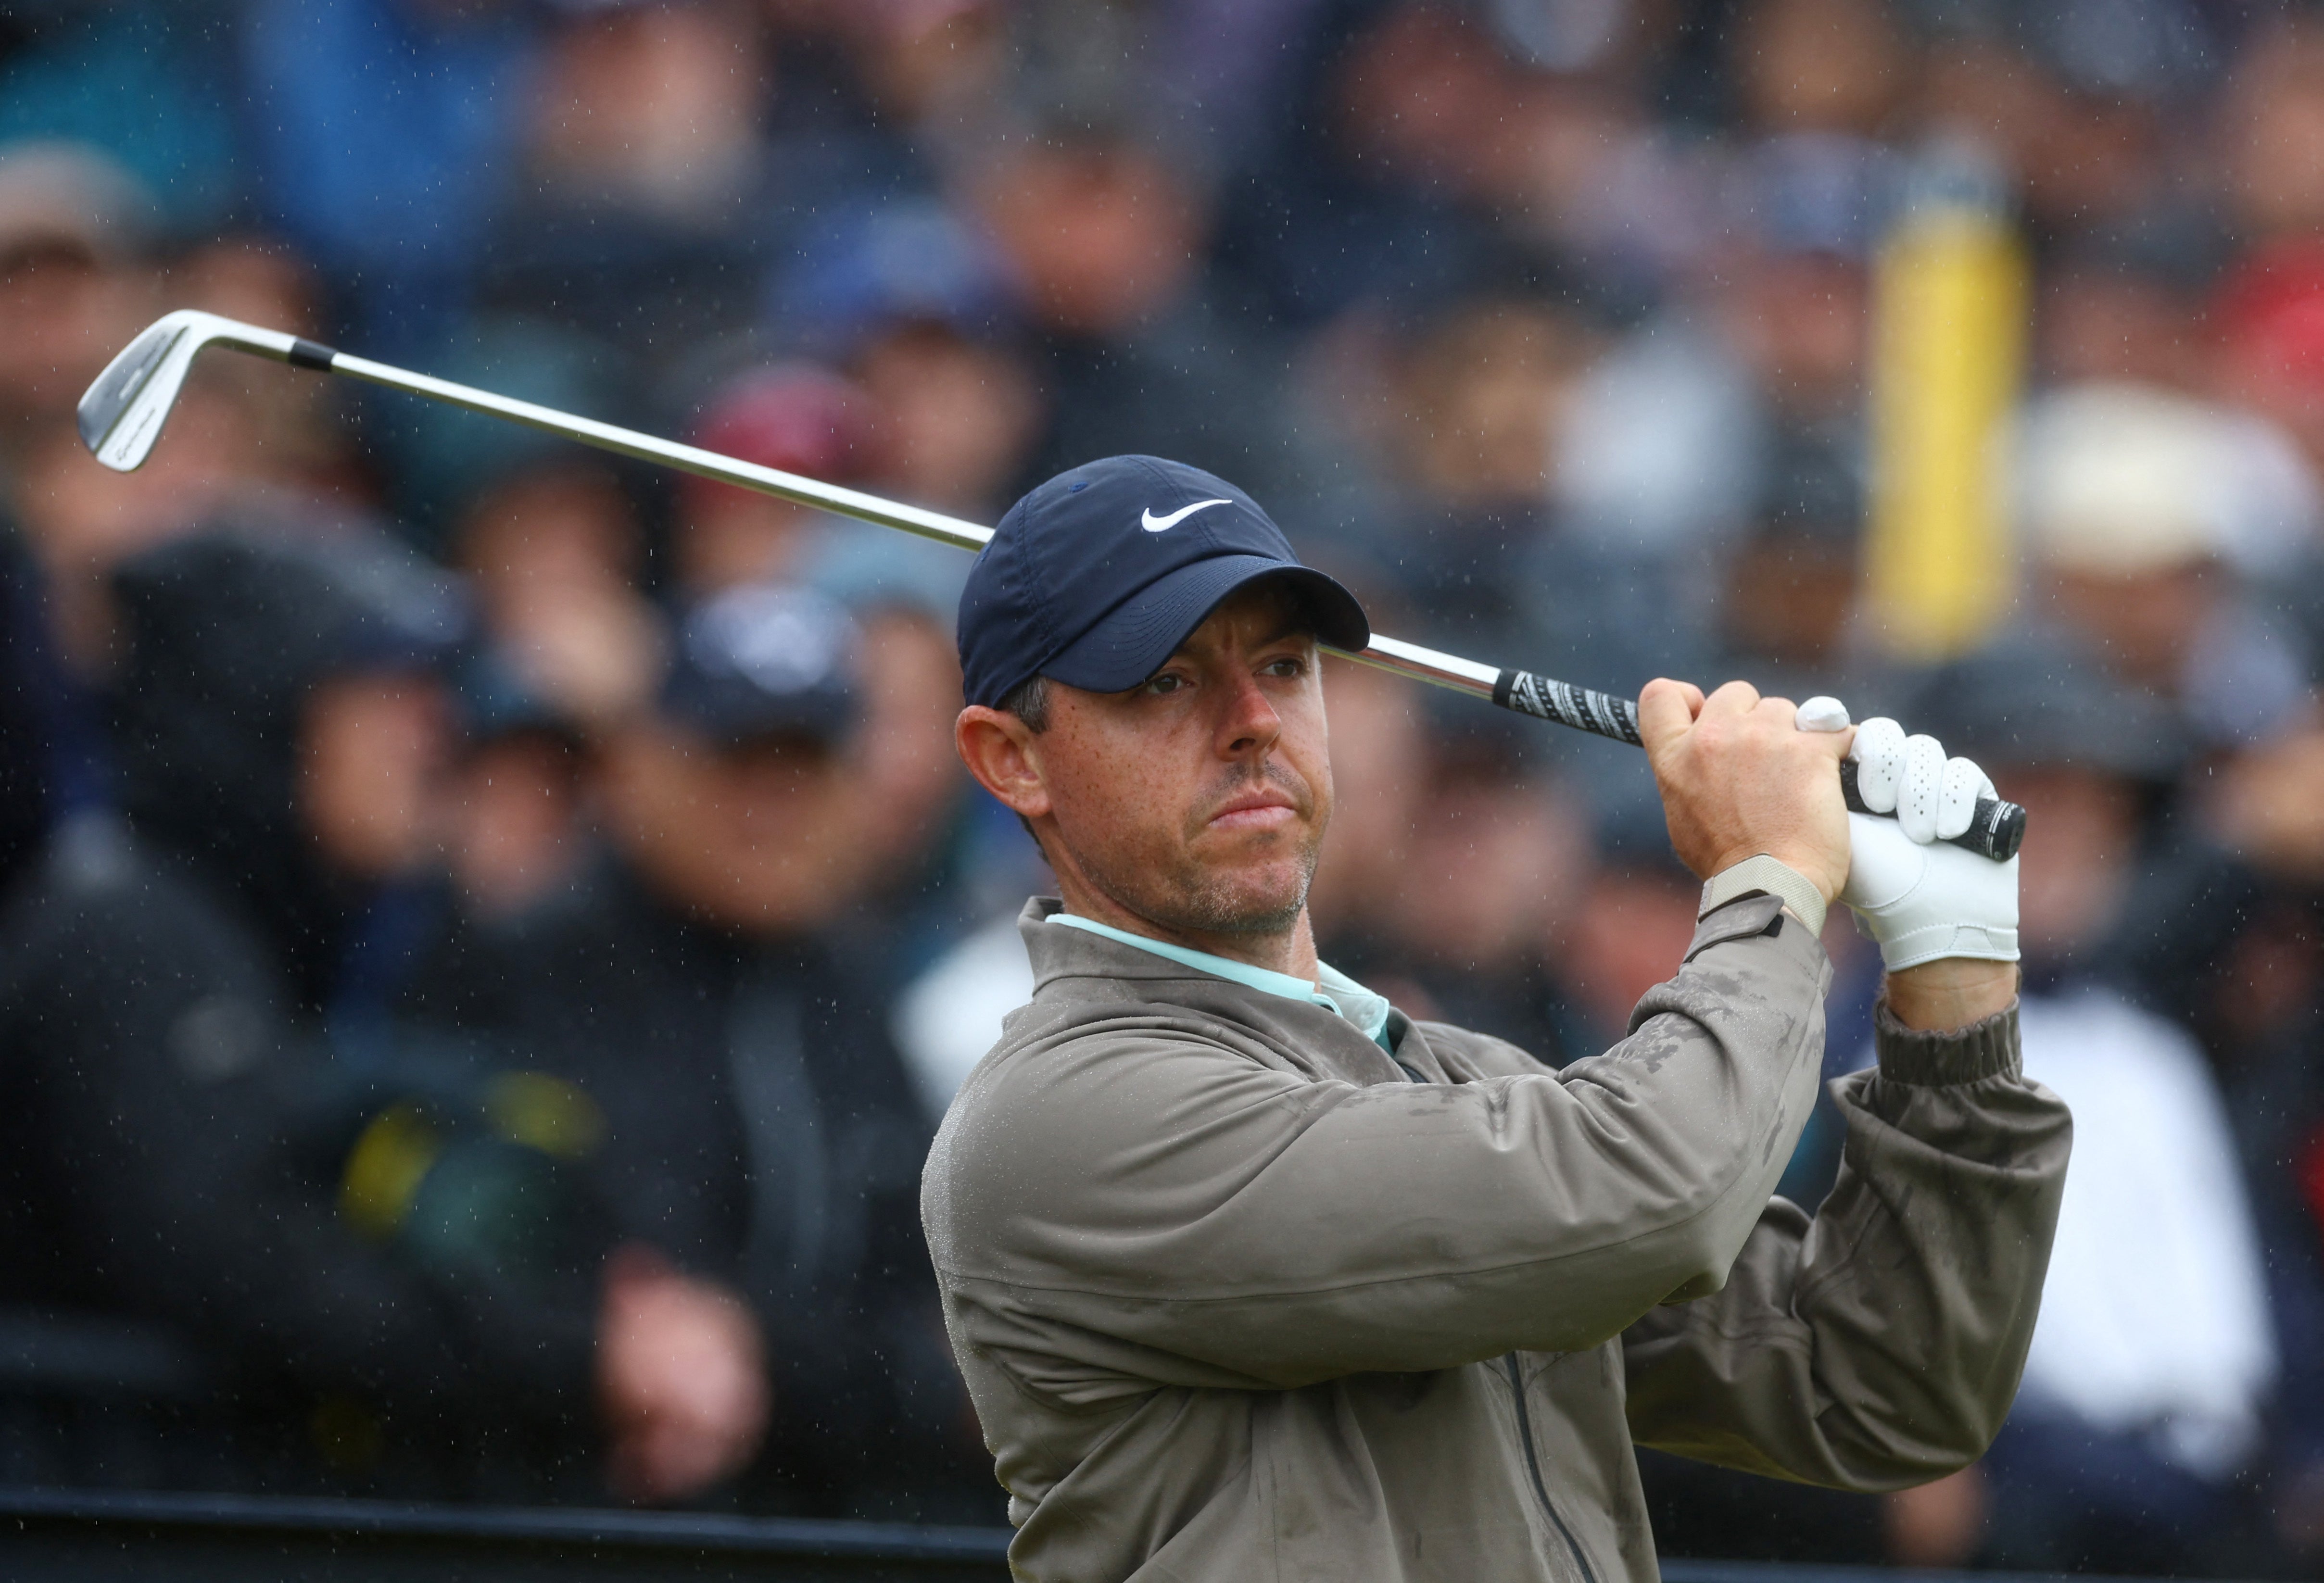 McIlroy has consitently defended the PGA tour against LIV